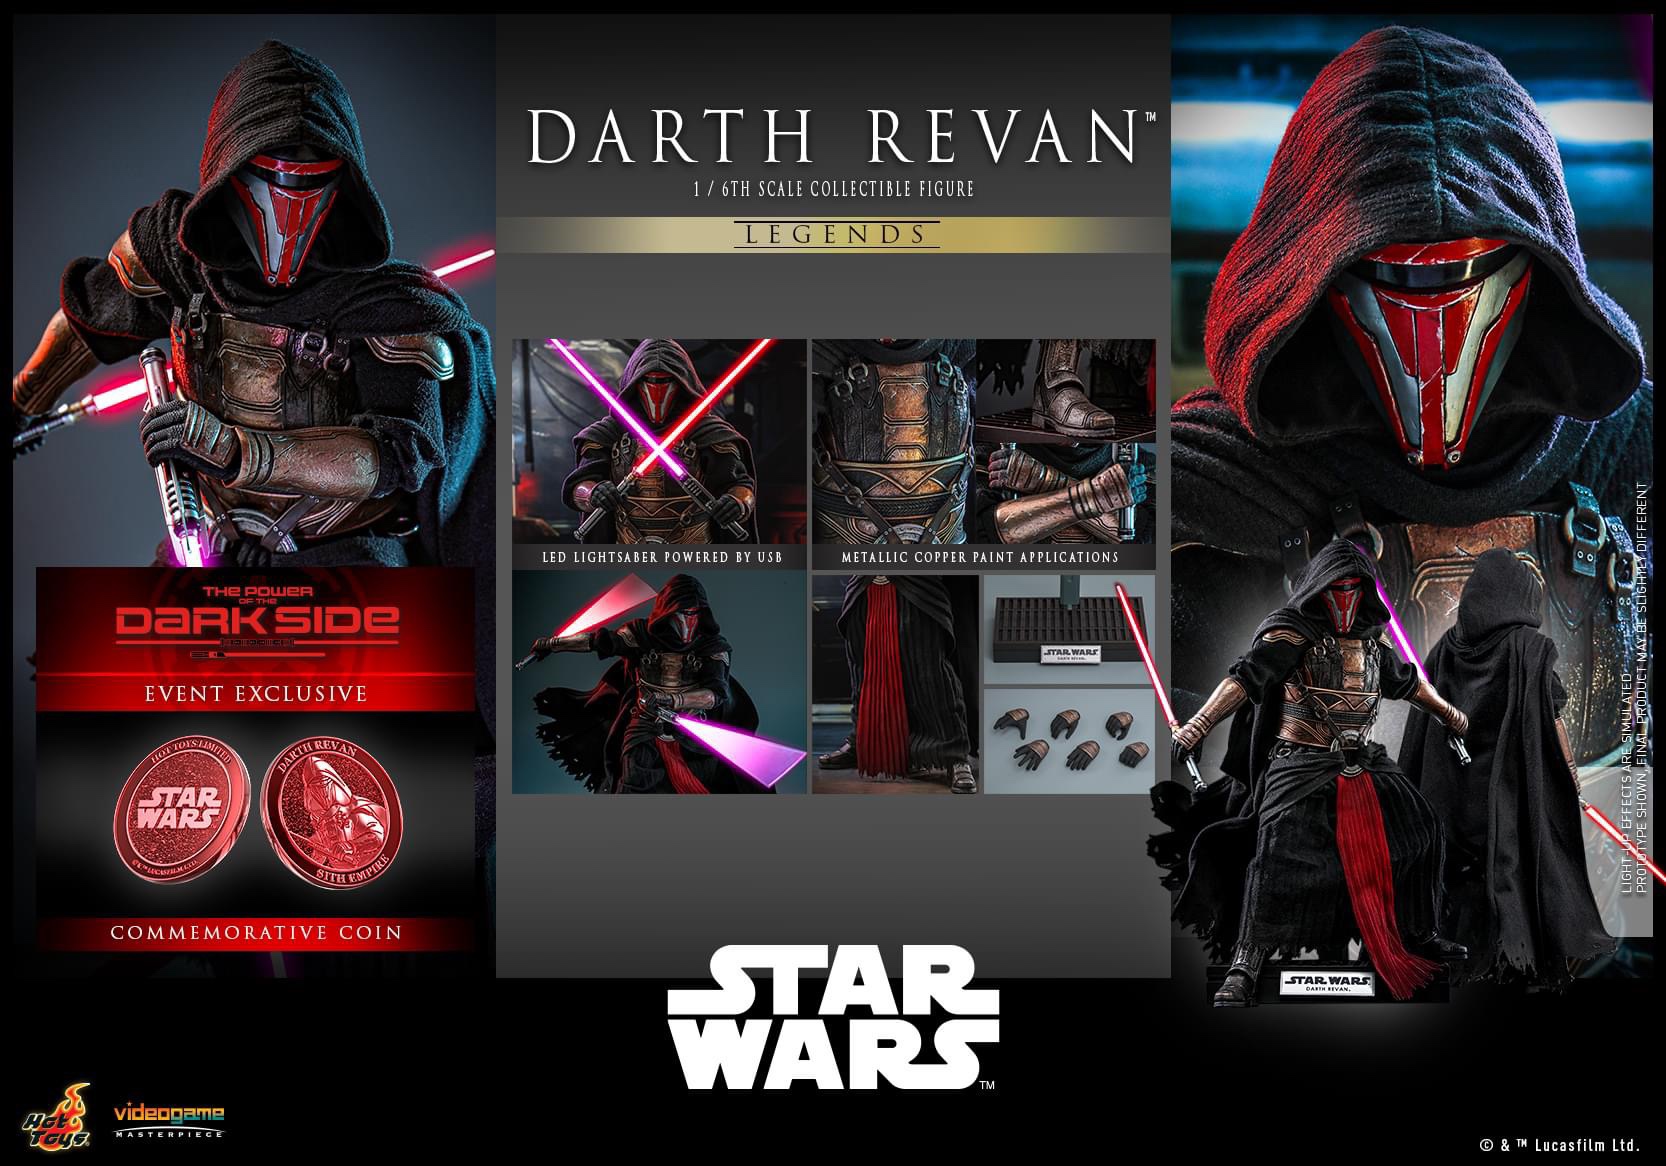 HOT TOYS VGM62B STAR WARS™ DARTH REVAN™ 1/6TH SCALE COLLECTIBLE FIGURE